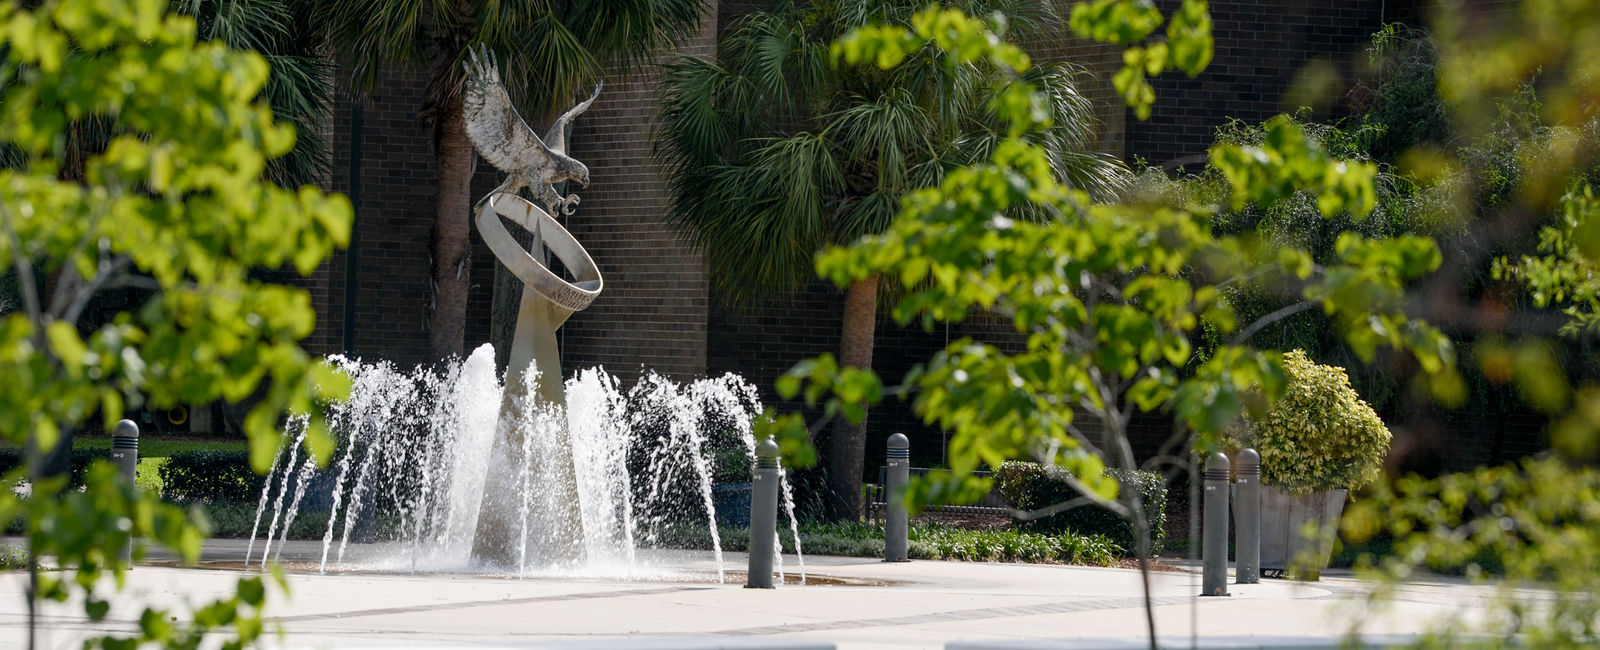 Campus shot of the UNF osprey fountain with trees and foliage around it